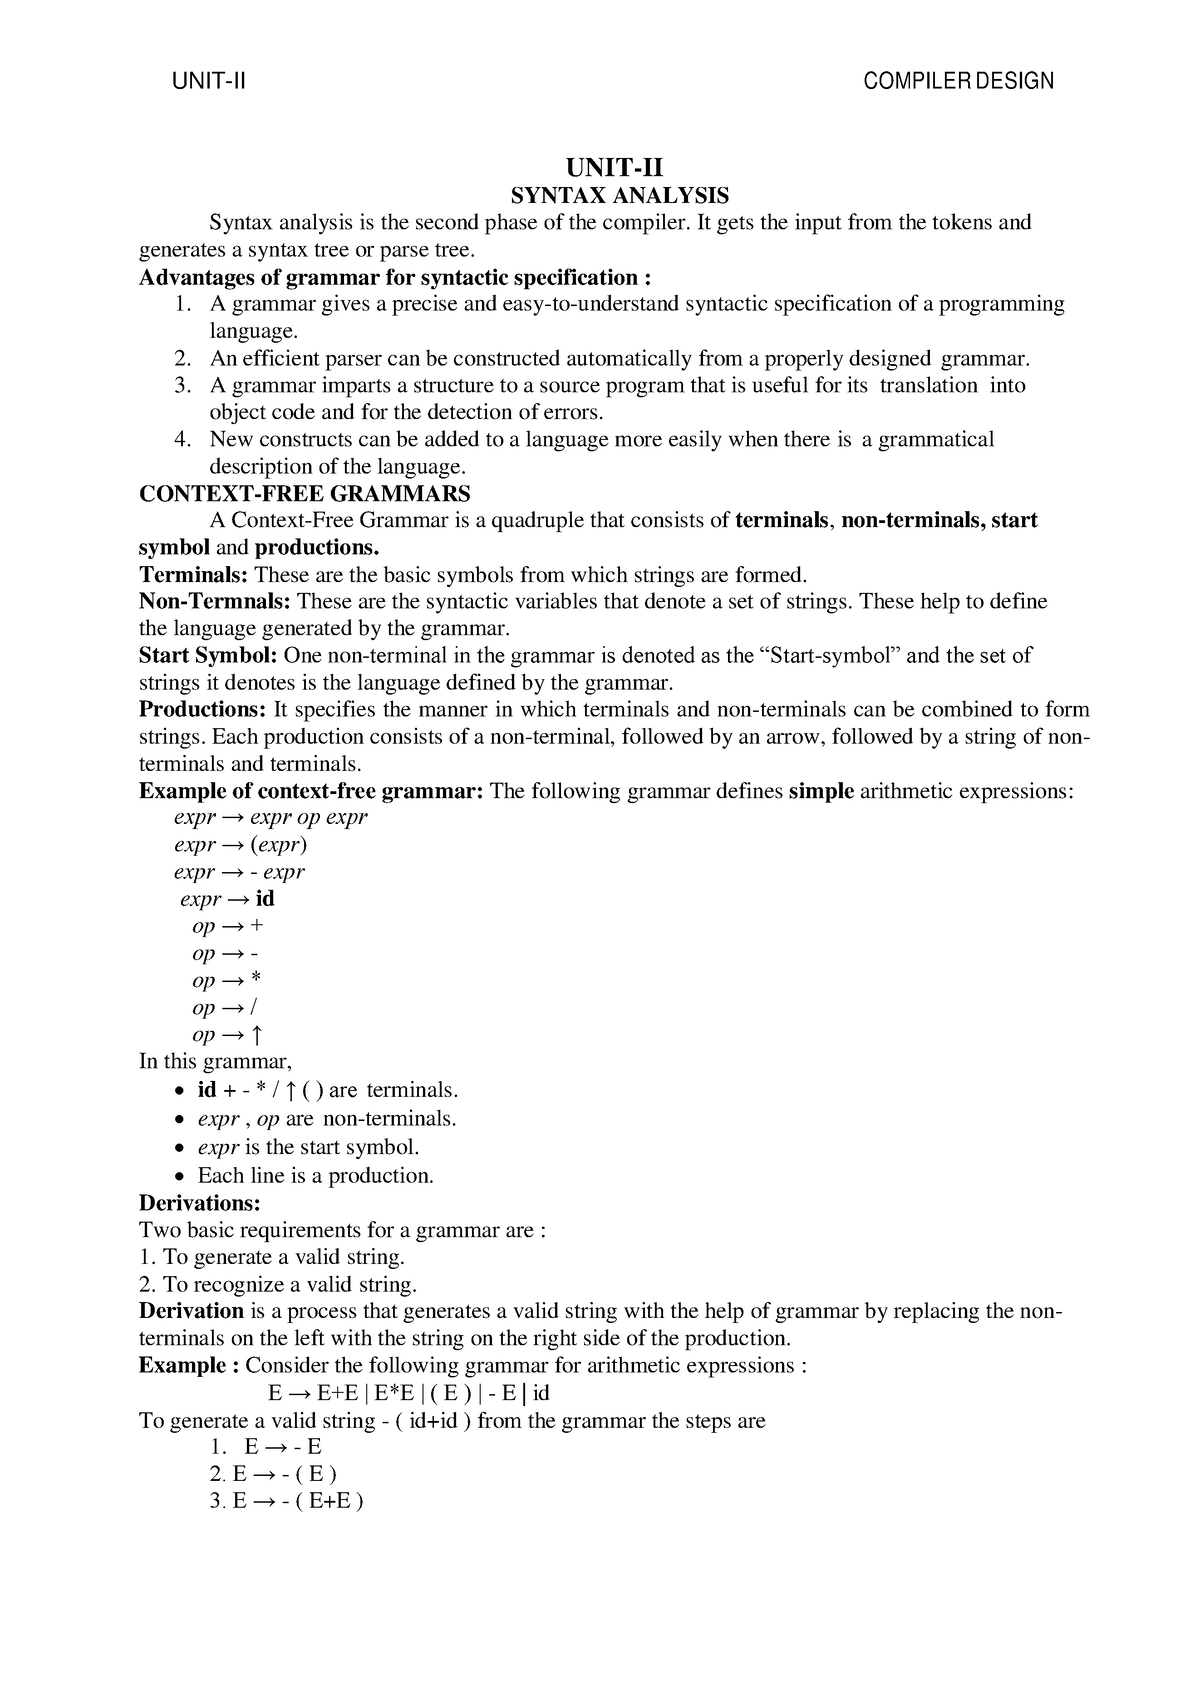 Cd-unit-ii - helpful notes - UNIT-II SYNTAX ANALYSIS Syntax analysis is ...